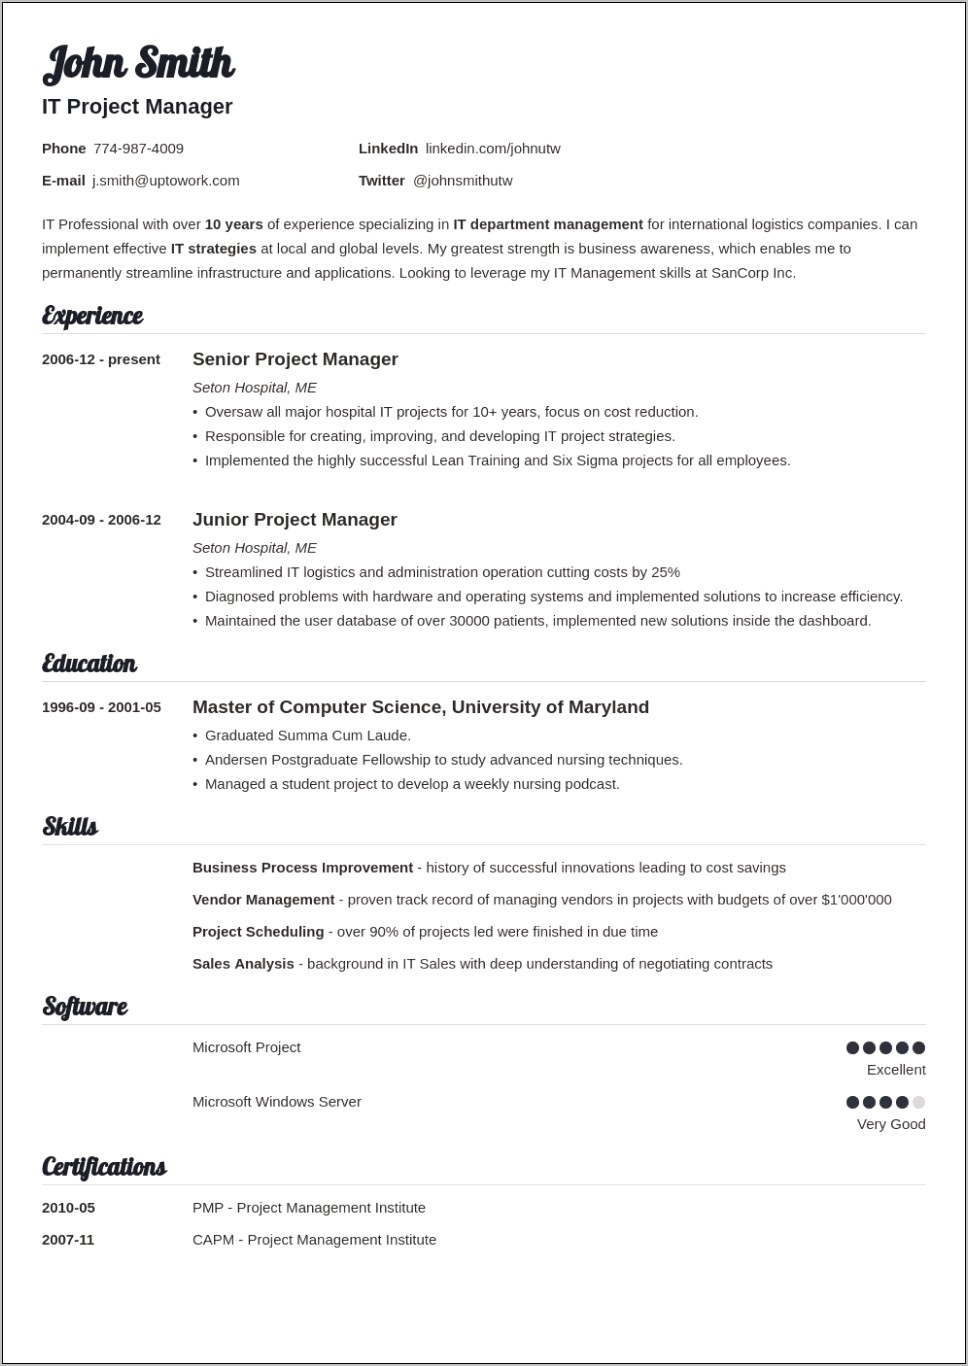 Sample Resume With Temp Agency Employment